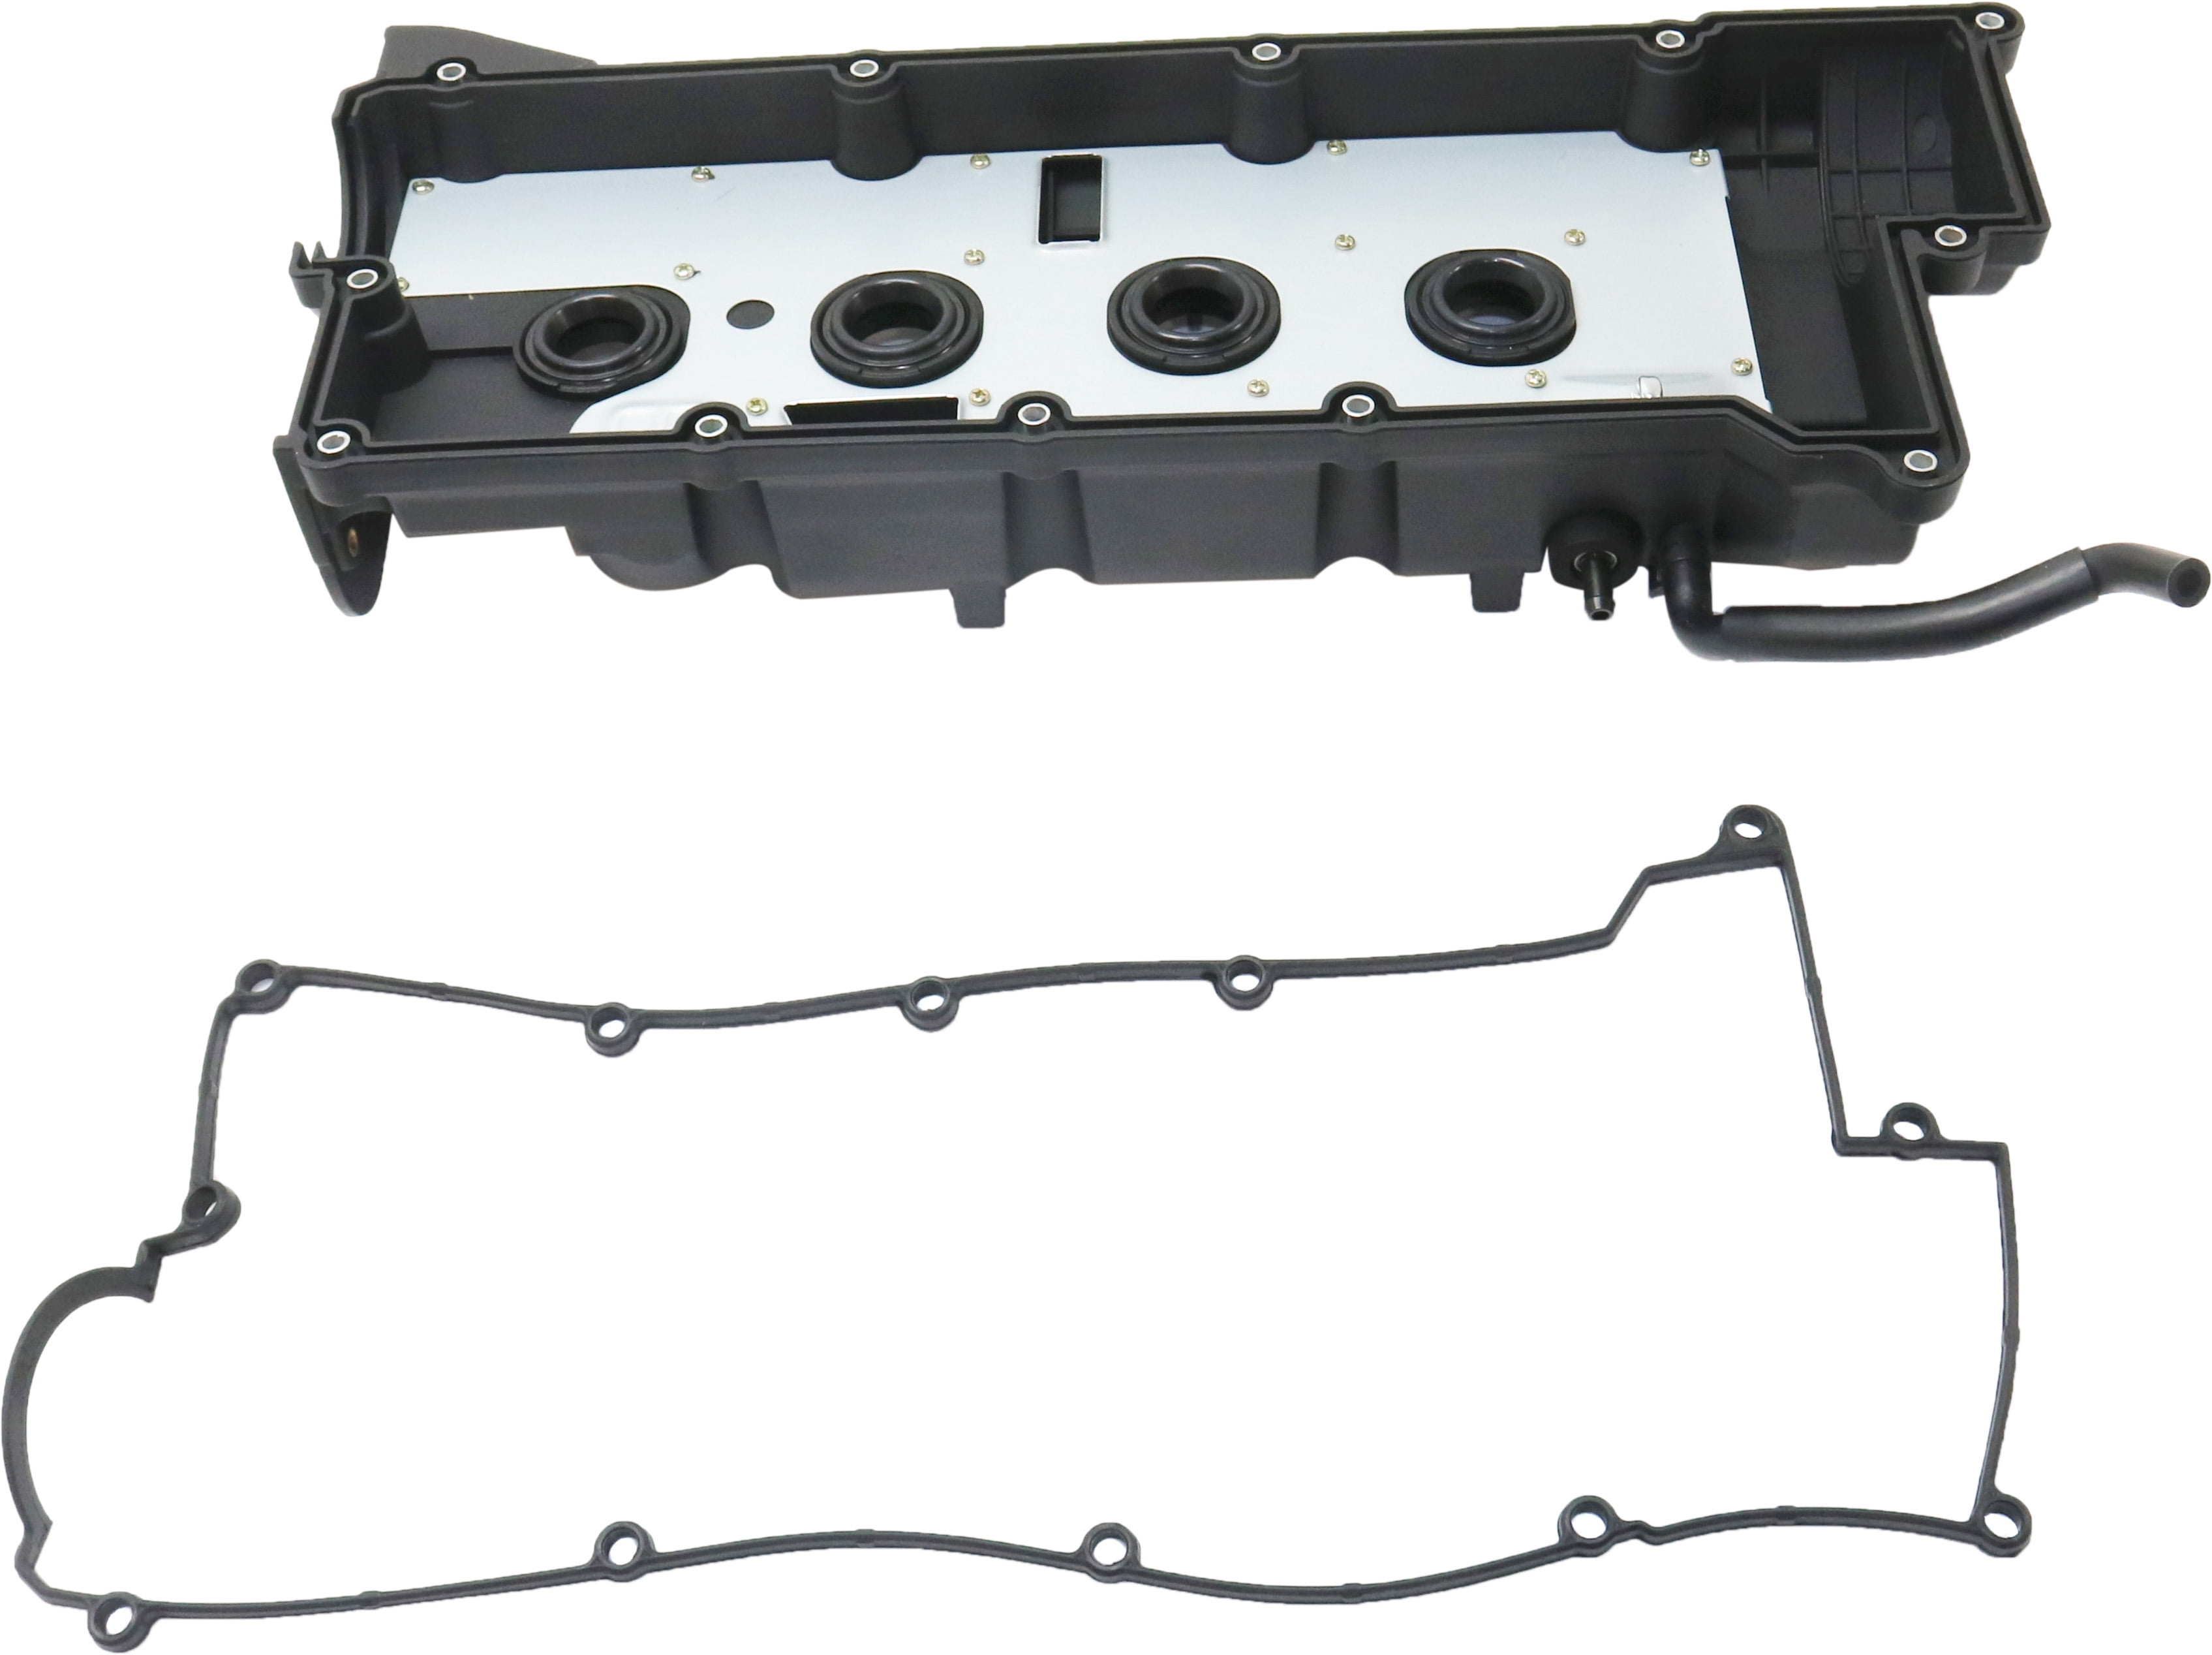 Replacement RH32040001 Valve Cover Compatible with 2004 Hyundai Tiburon  2002-2004 Elantra 4Cyl 2.0L